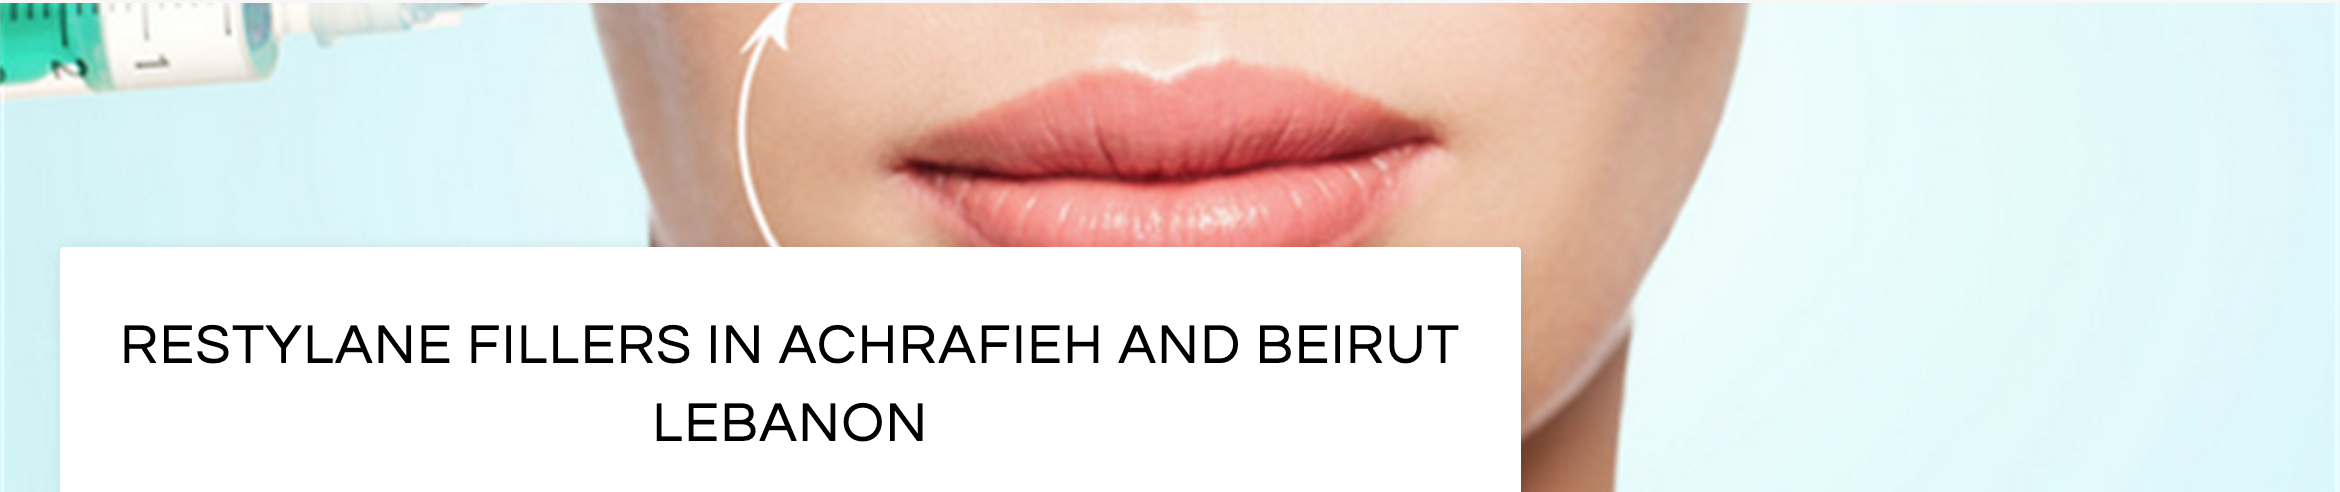 Restylane fillers in Beirut Lebanon and Achrafieh with top plastic surgeon